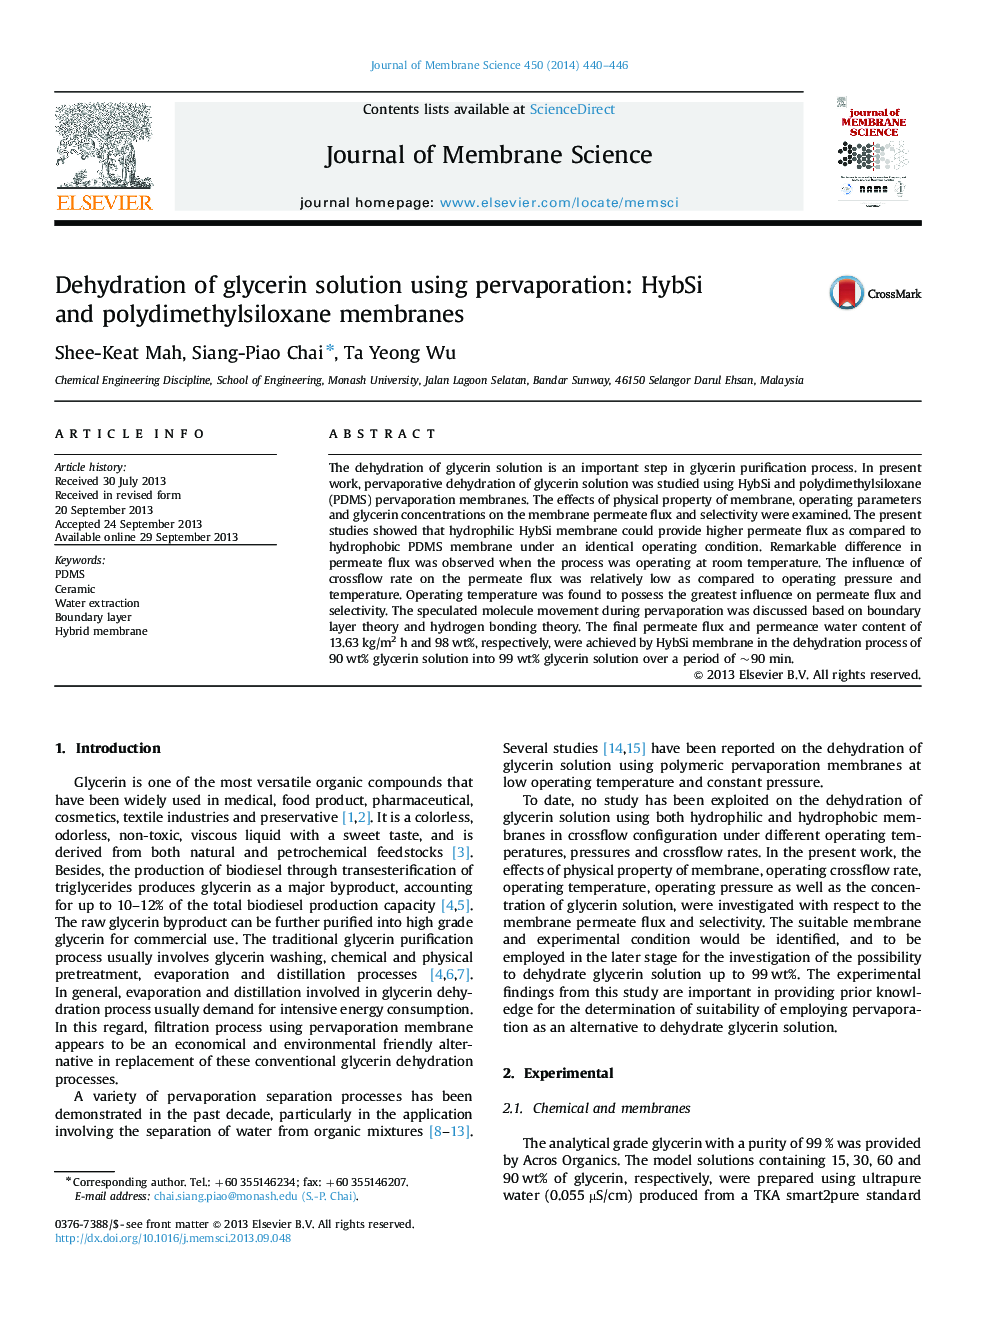 Dehydration of glycerin solution using pervaporation: HybSi and polydimethylsiloxane membranes